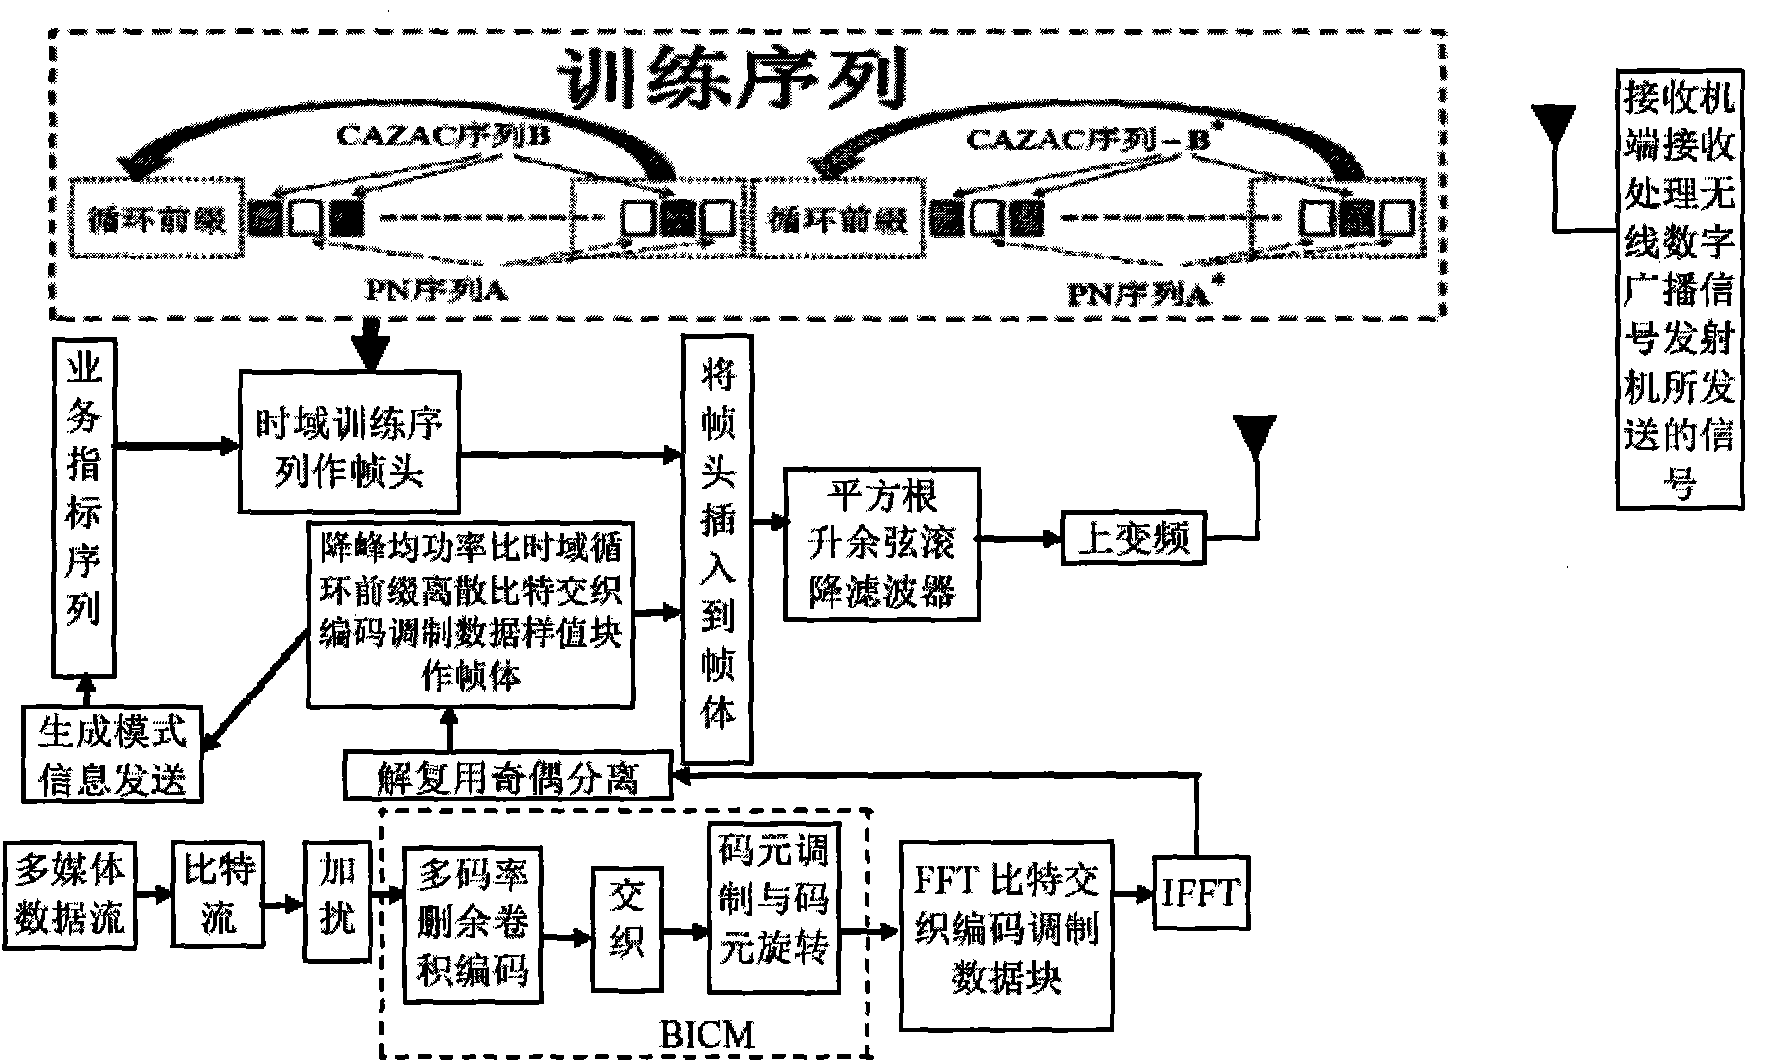 Anti-interference mobile signal transmission method for digital broadcast